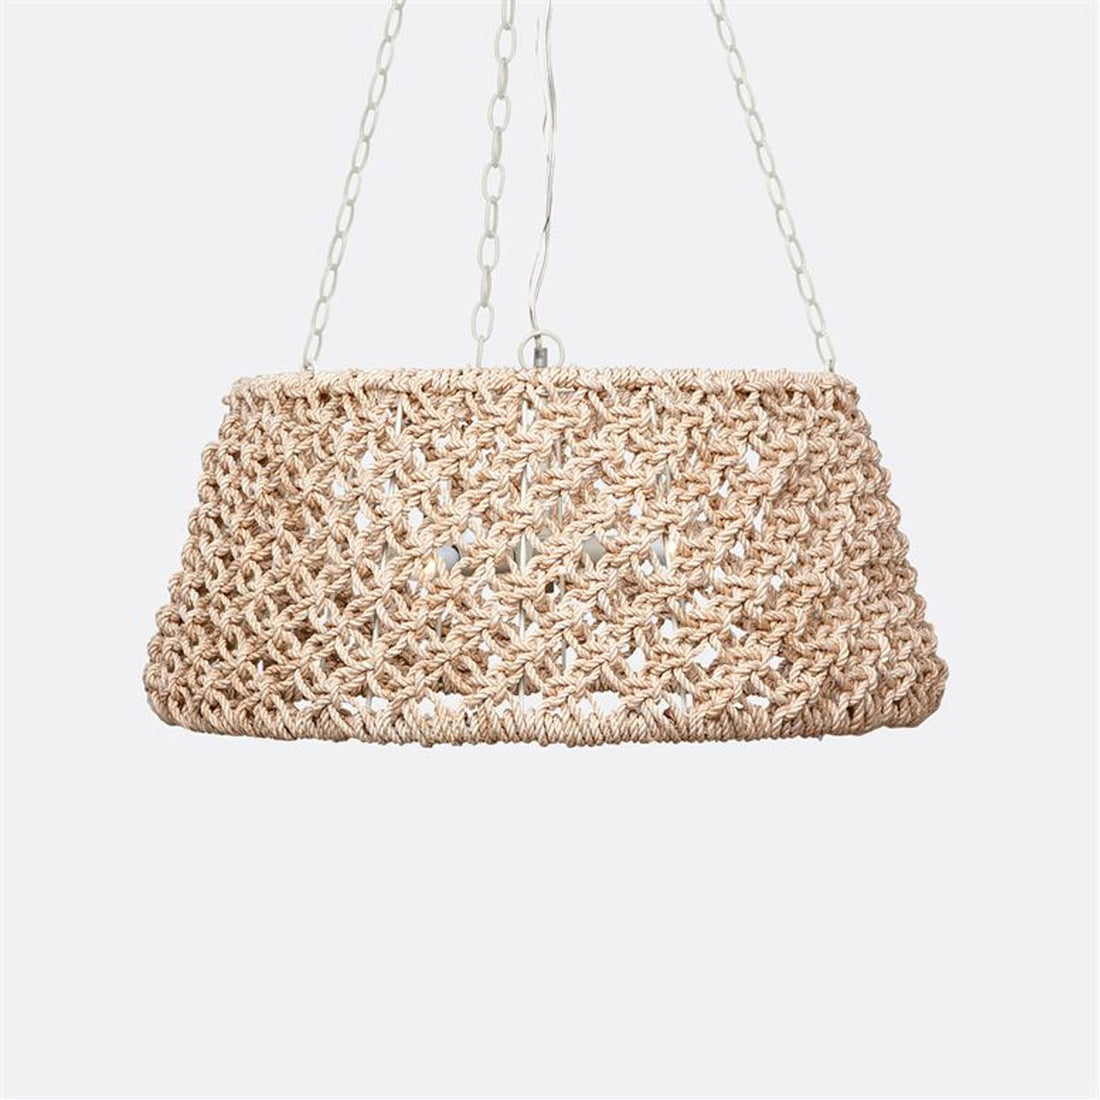 Made Goods Tully Abaca Rope Drum Chandelier